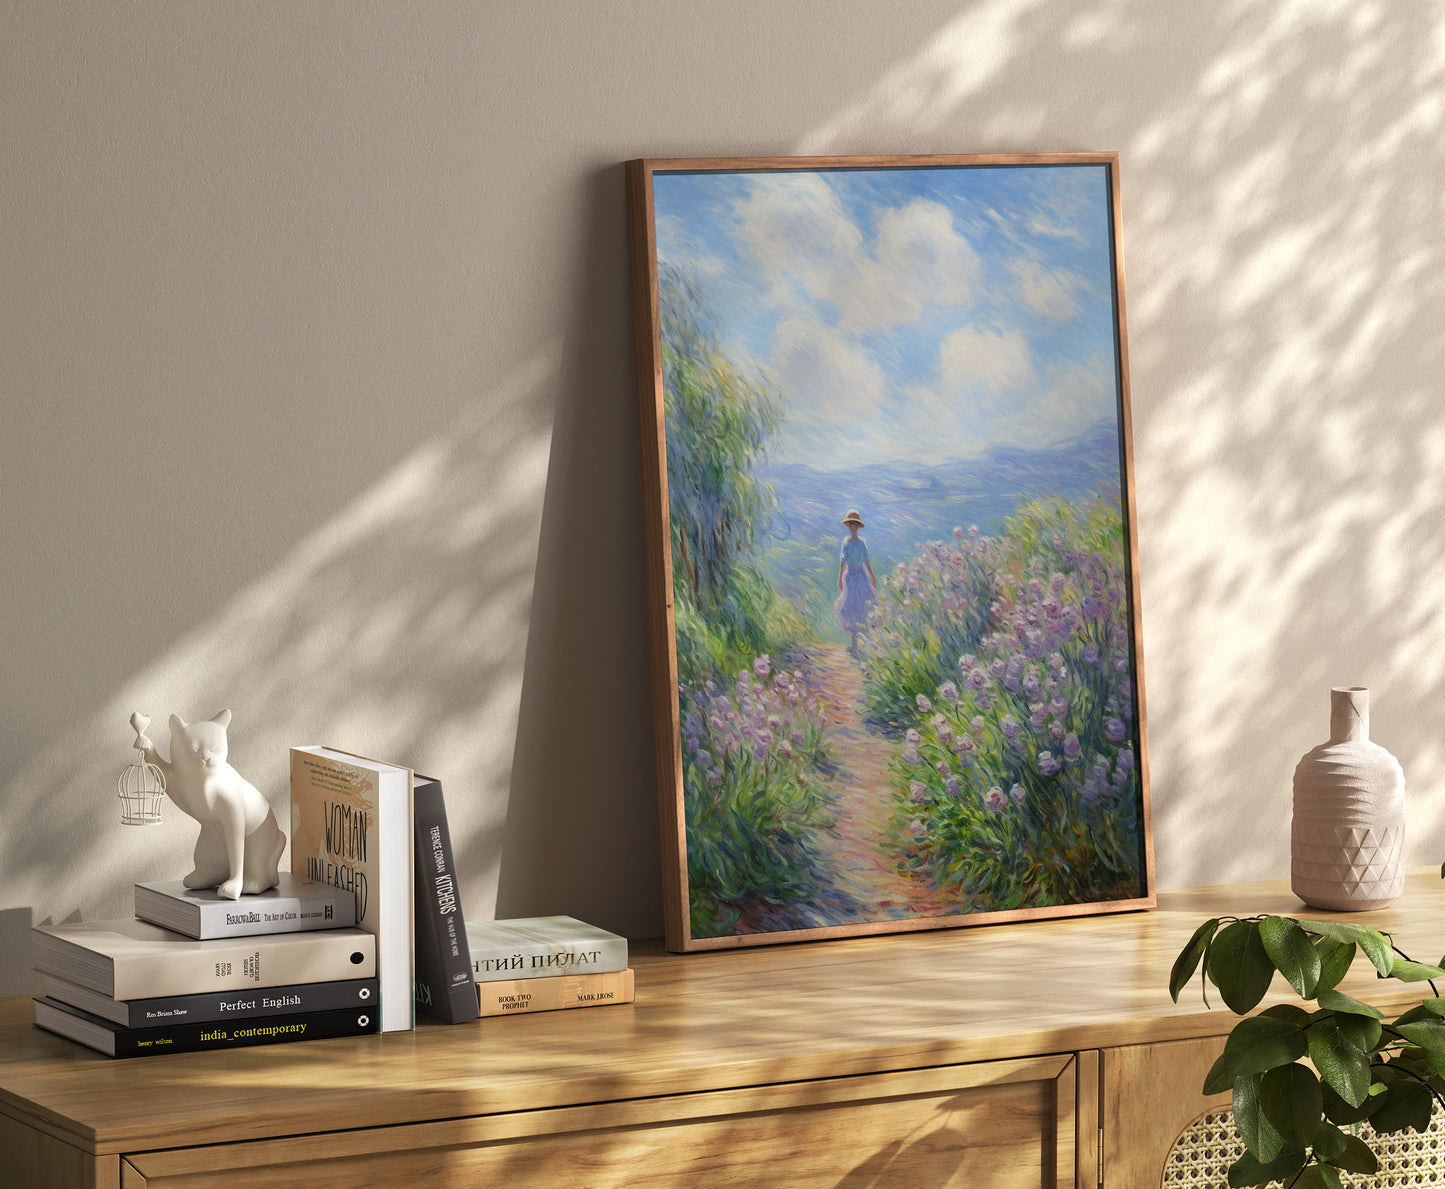 A framed impressionist painting of a figure on a path beside books and decor on a credenza.